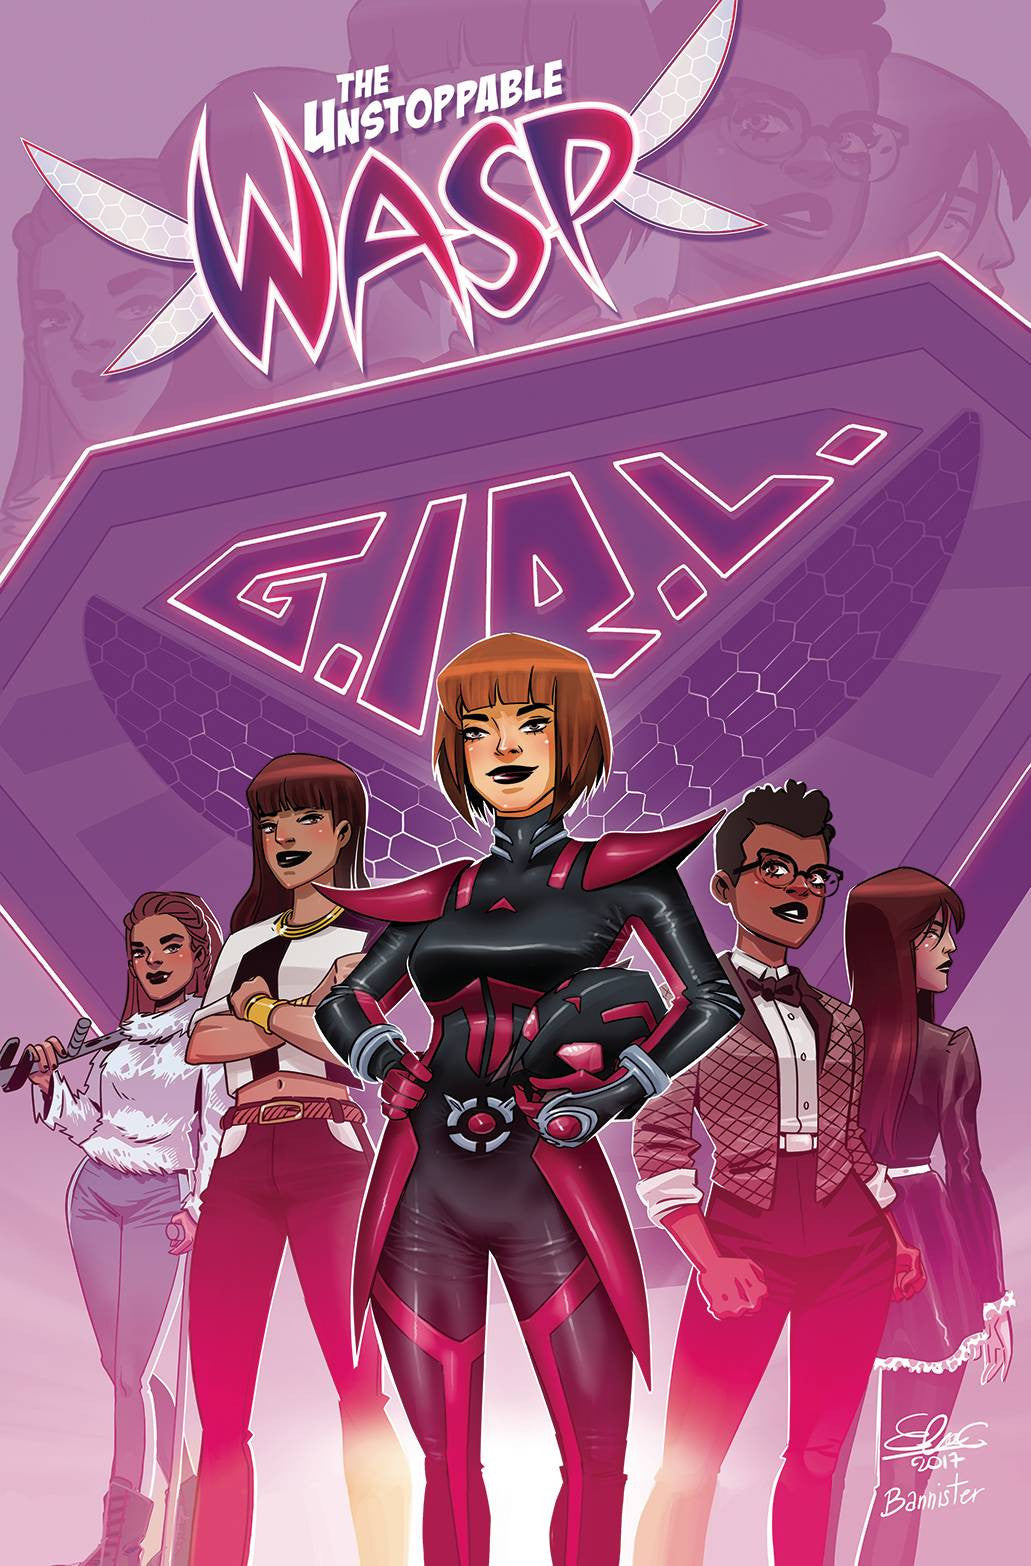 UNSTOPPABLE WASP #6 COVER